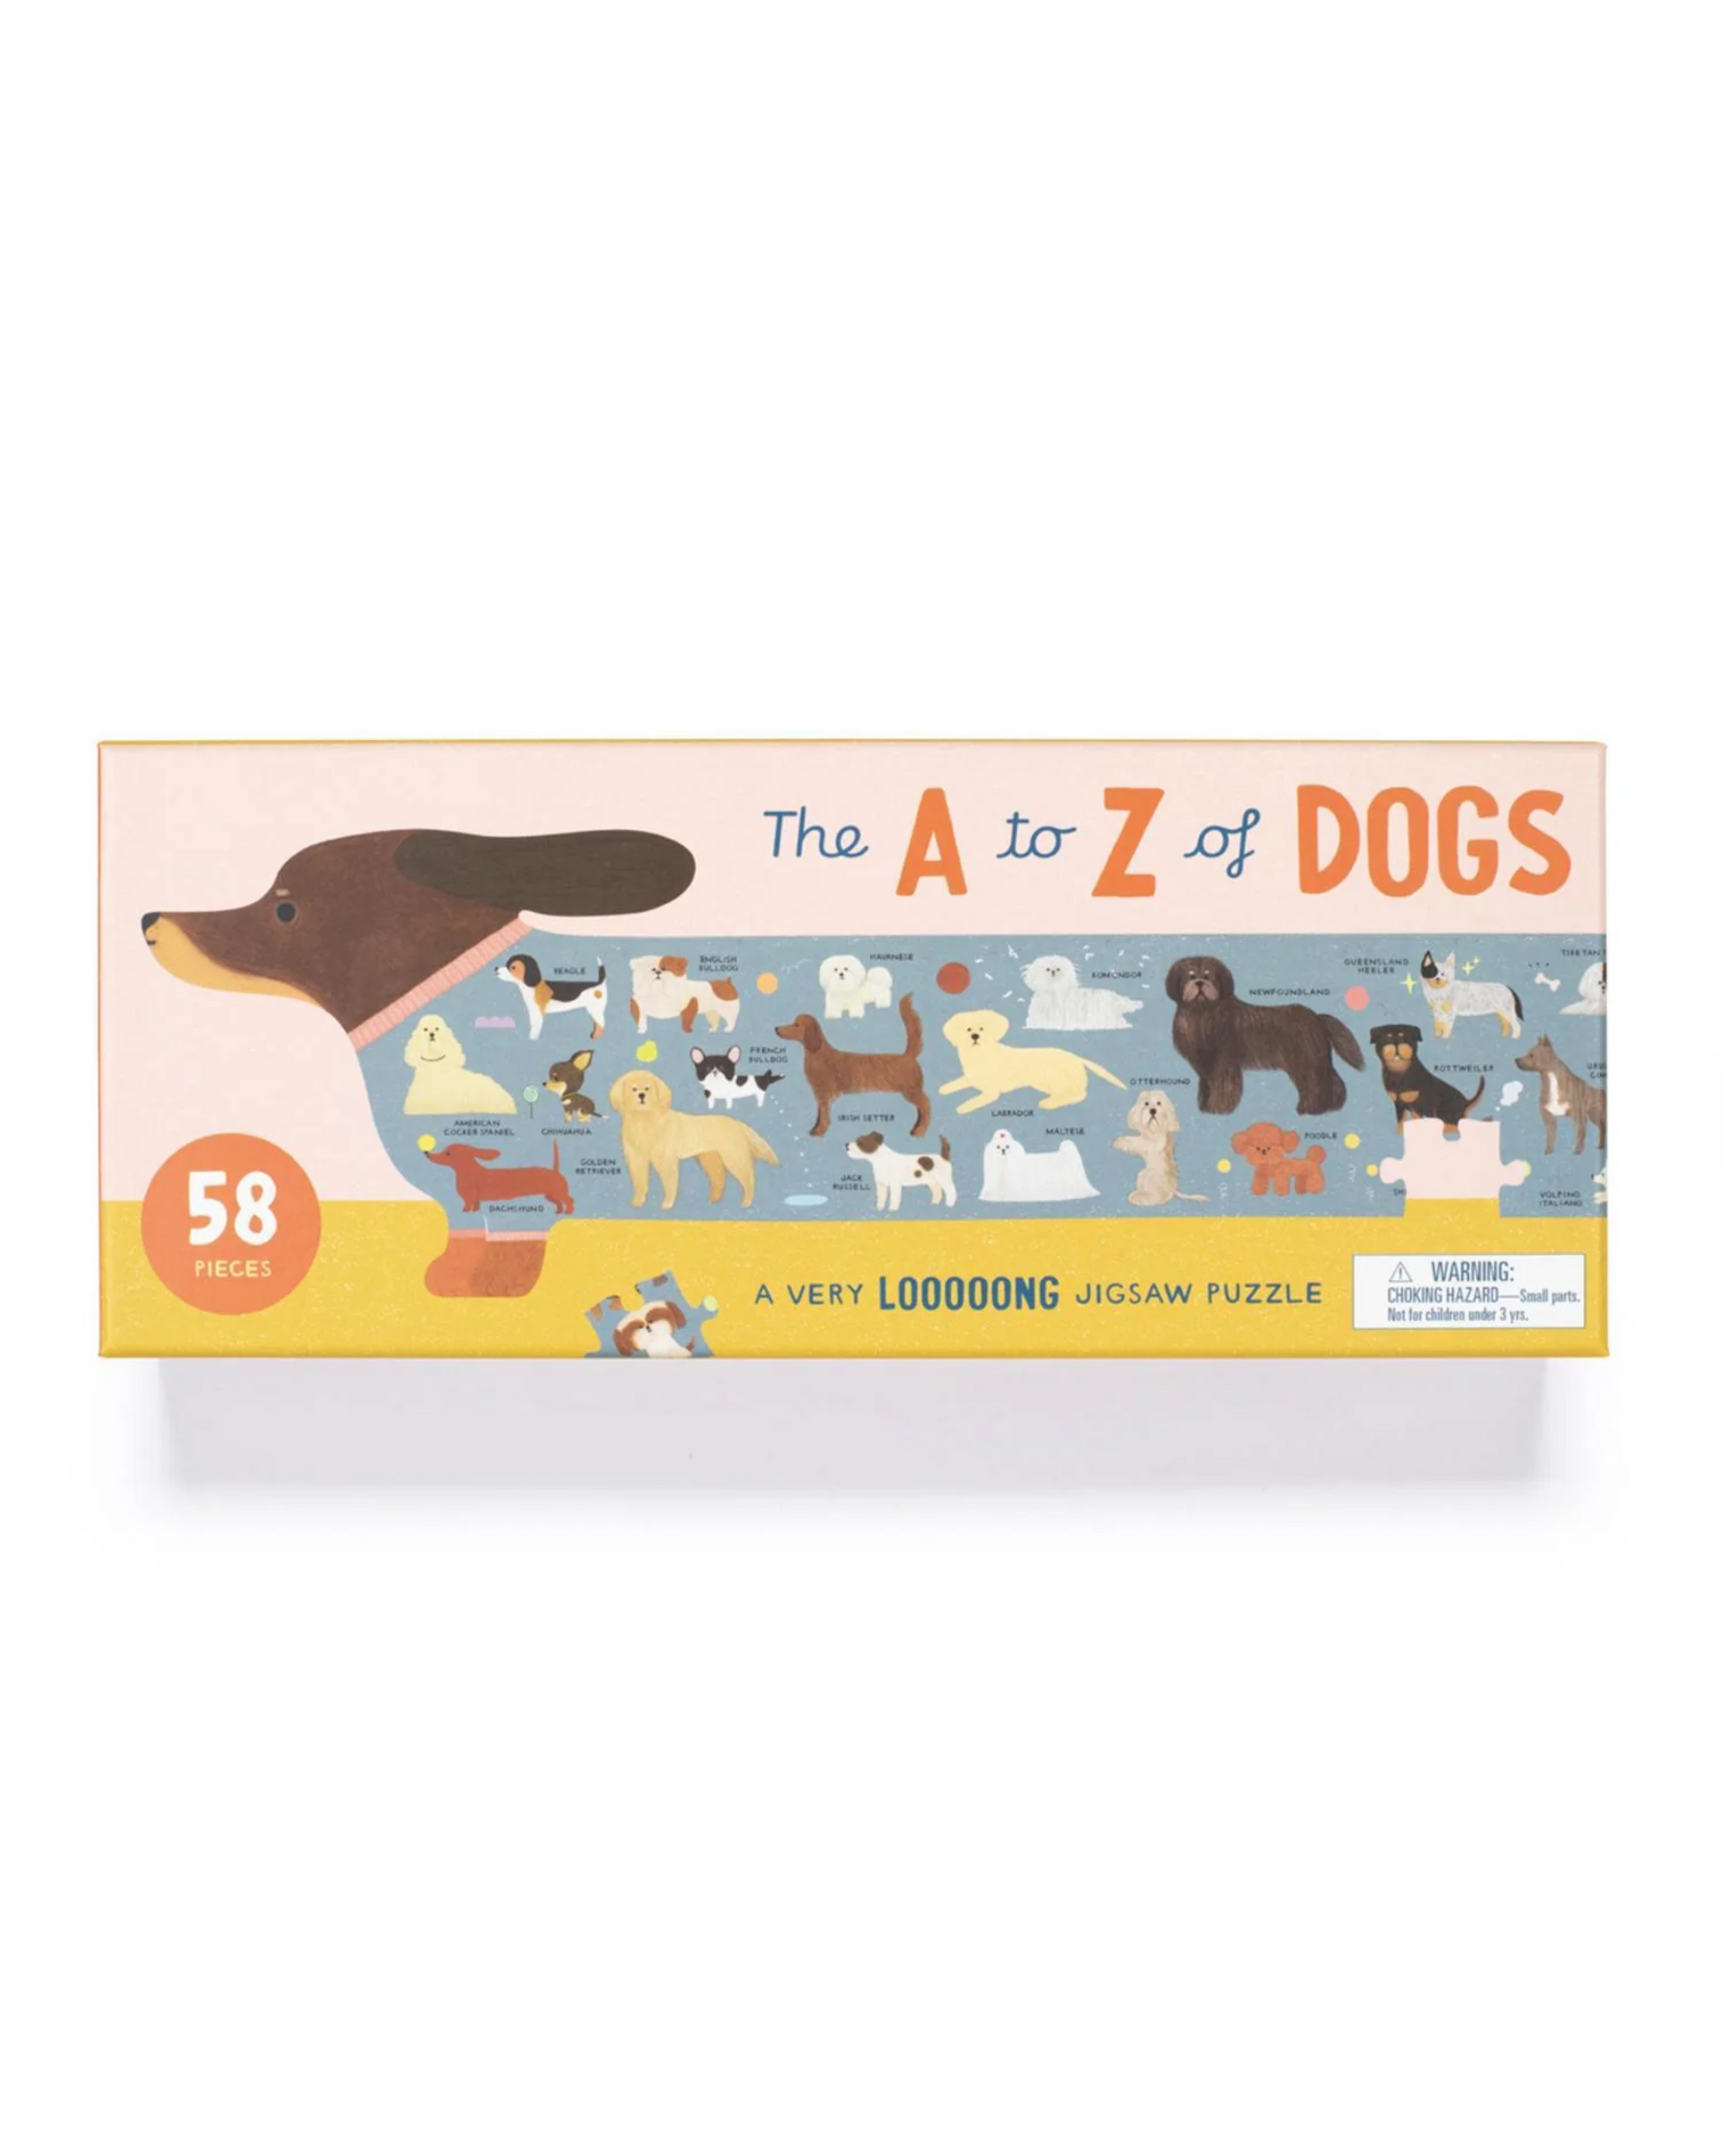 50 piece puzzle box showing a sausage dog shaped puzzle with a body made of many breeds of dogs